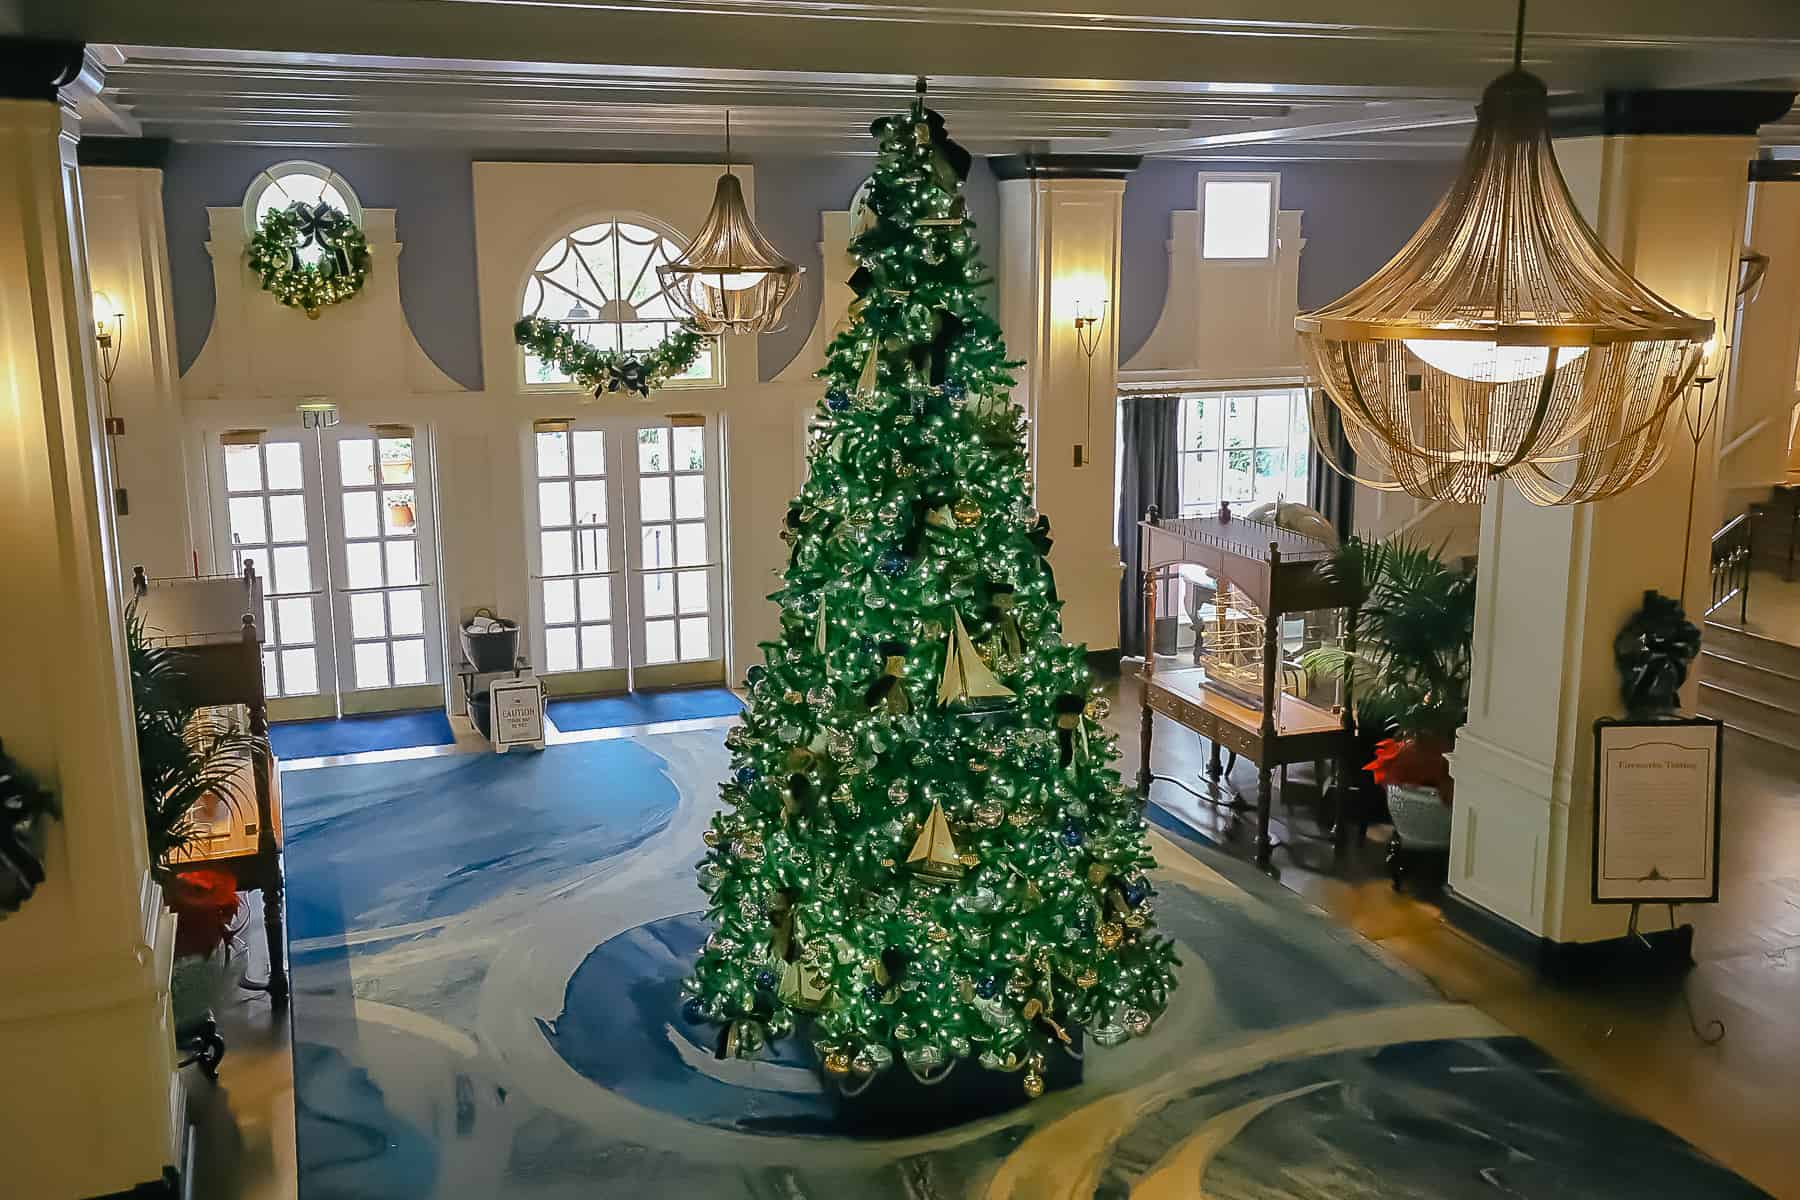 a view of Disney's Yacht Club Christmas tree taken from the hotels 2nd floor balcony